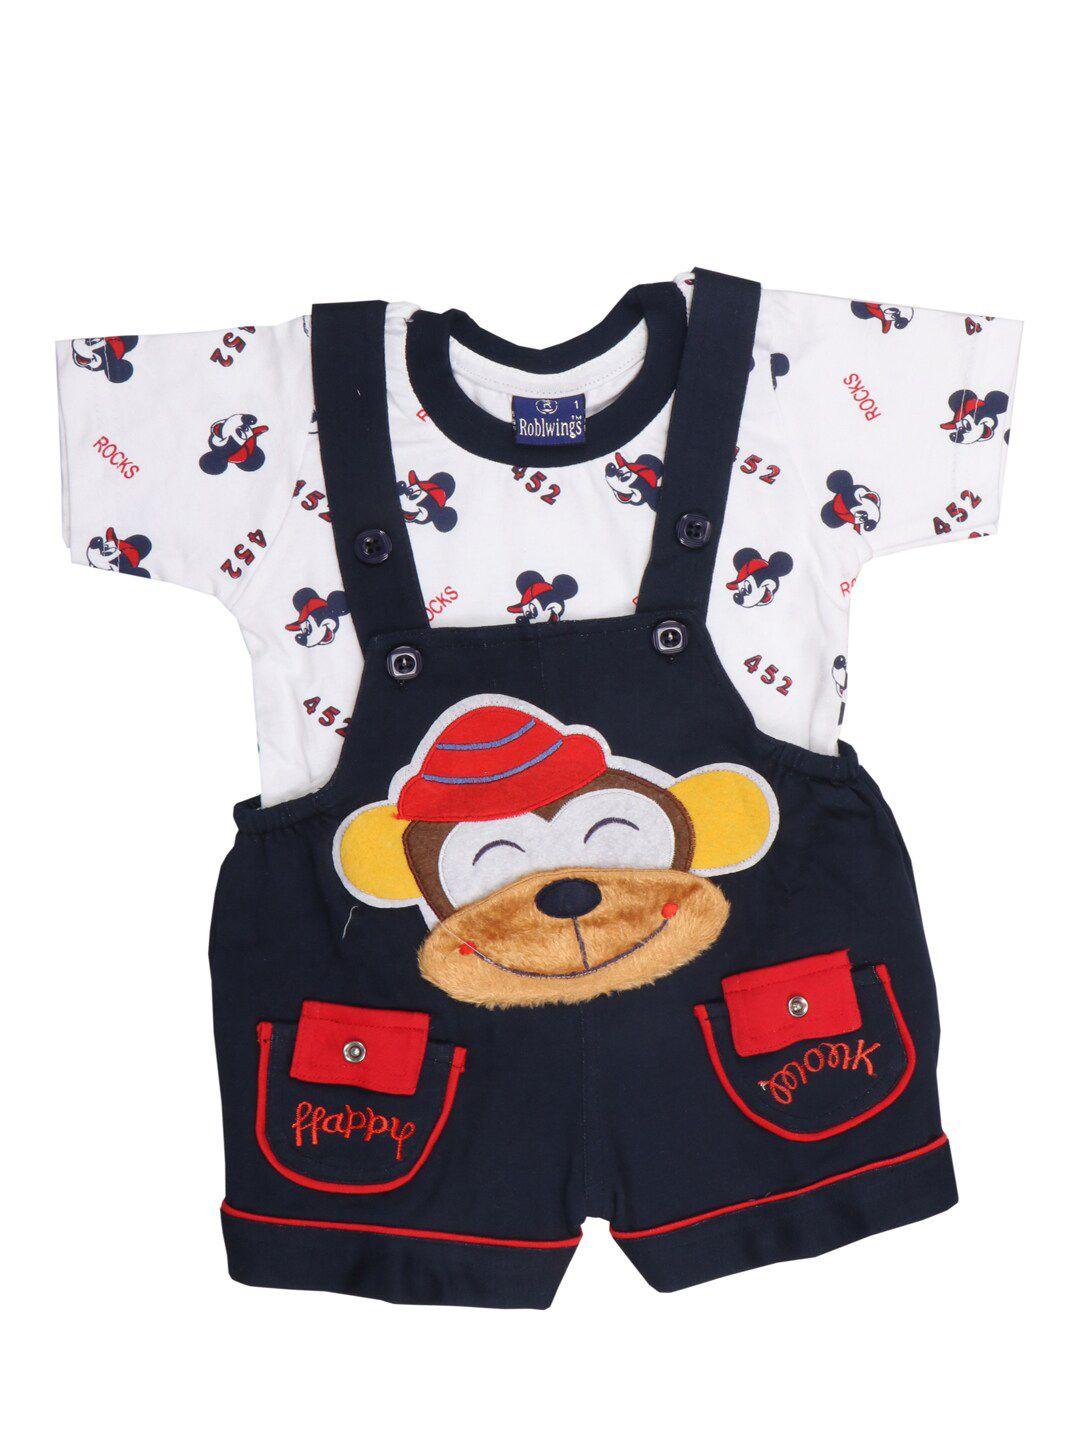 baesd-infants-kids-printed-pure-cotton-clothing-set